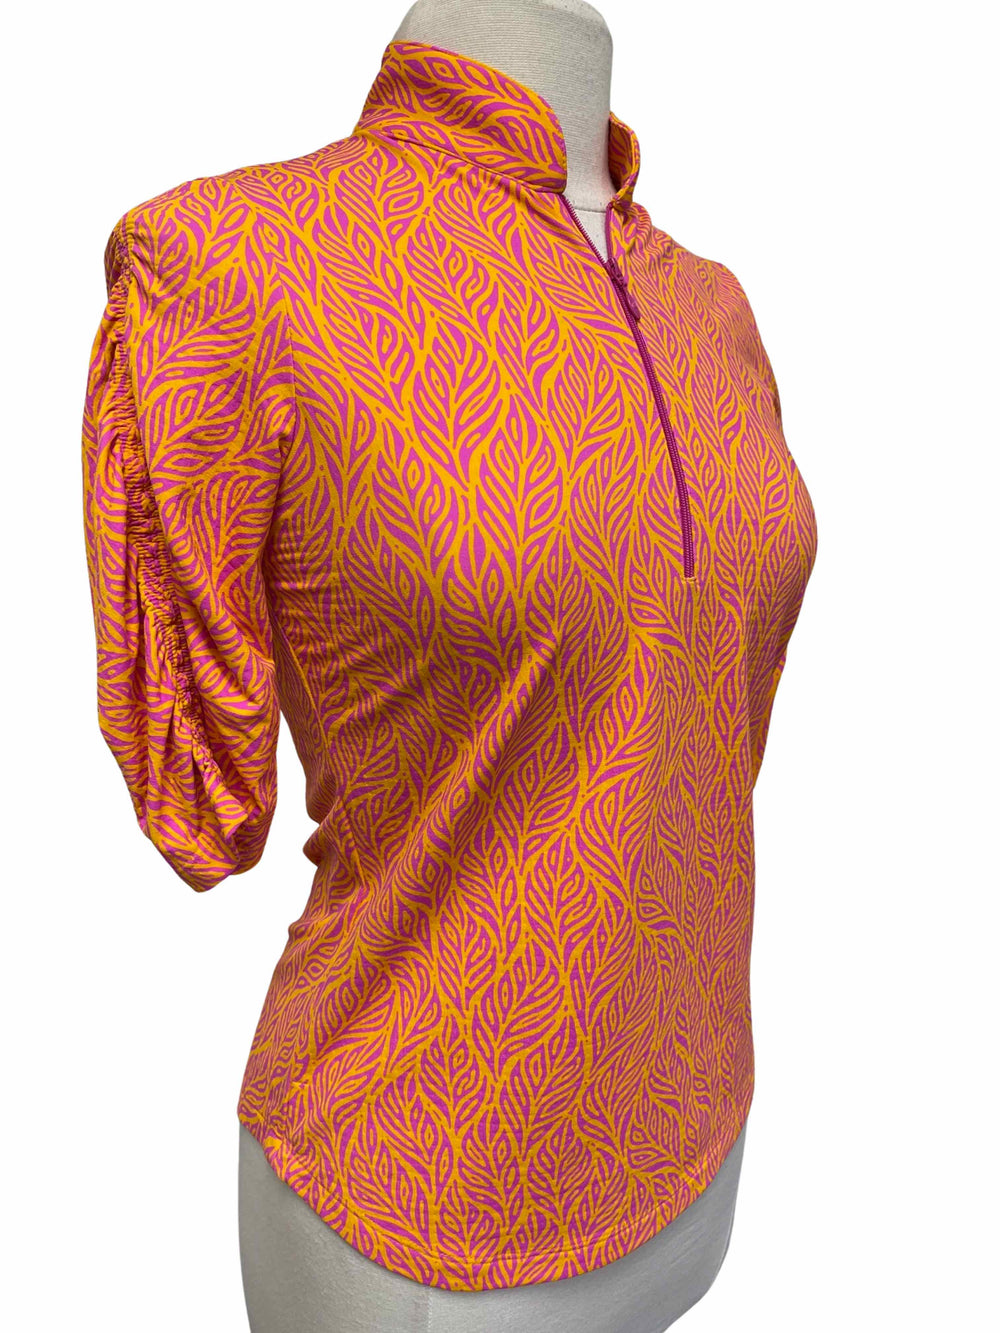 IBKUL Sally Print Ruched Elbow Length Sleeve Top- Size Small - Skorzie